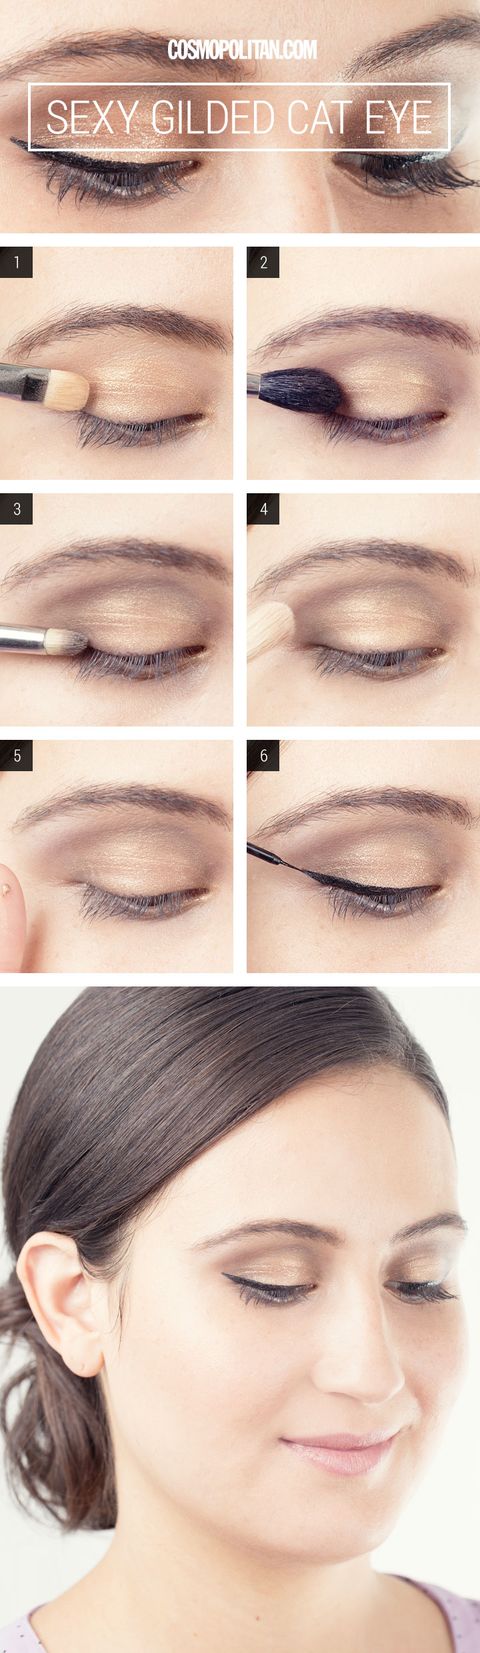 Gold Cat Eye Makeup How To Eye Makeup How To